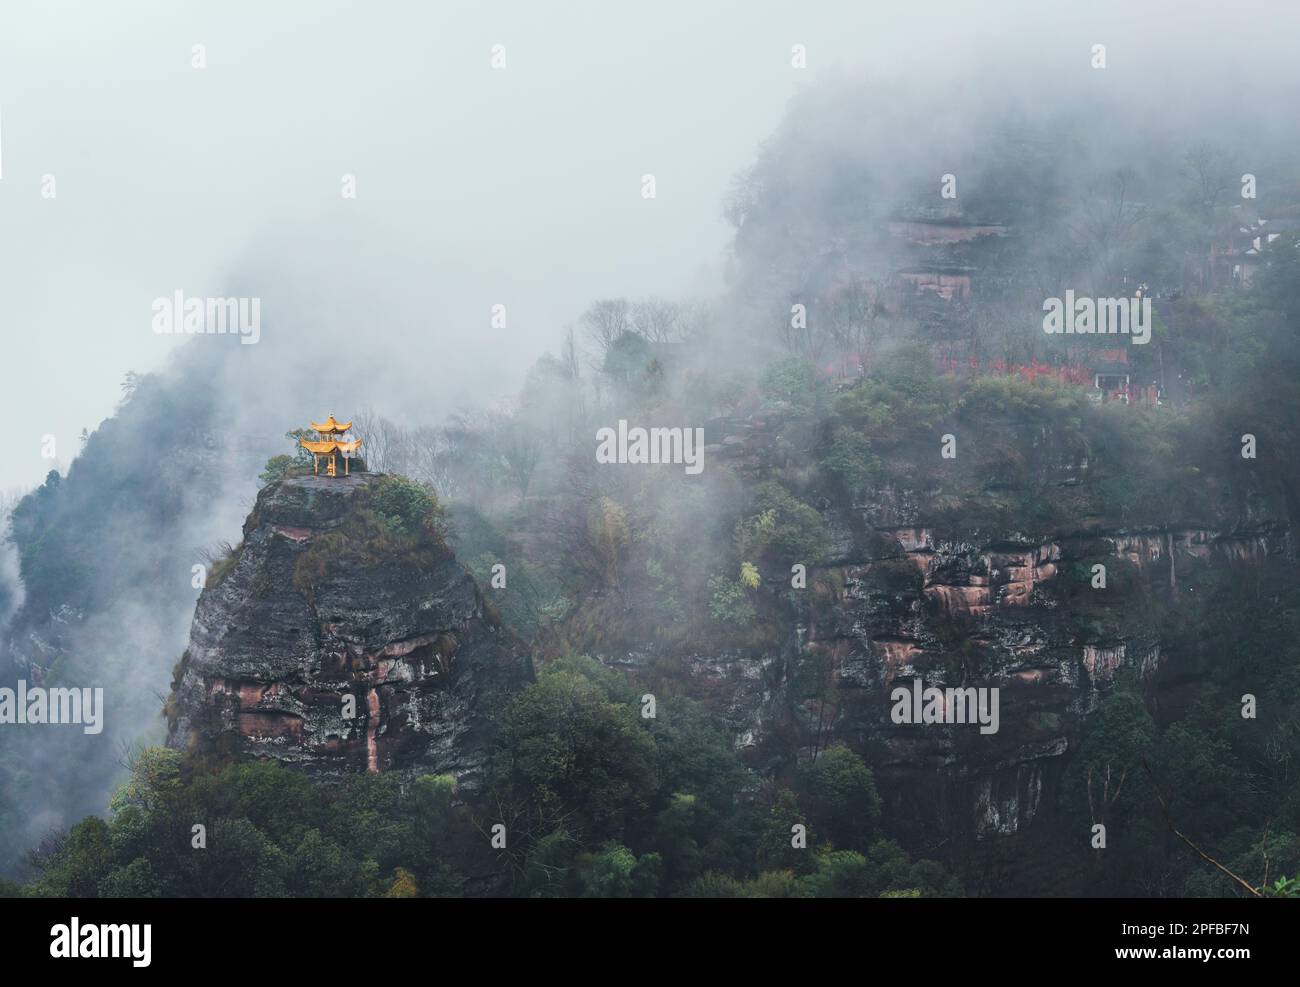 A Chinese Pavilion on the  top of hill in the mist Stock Photo